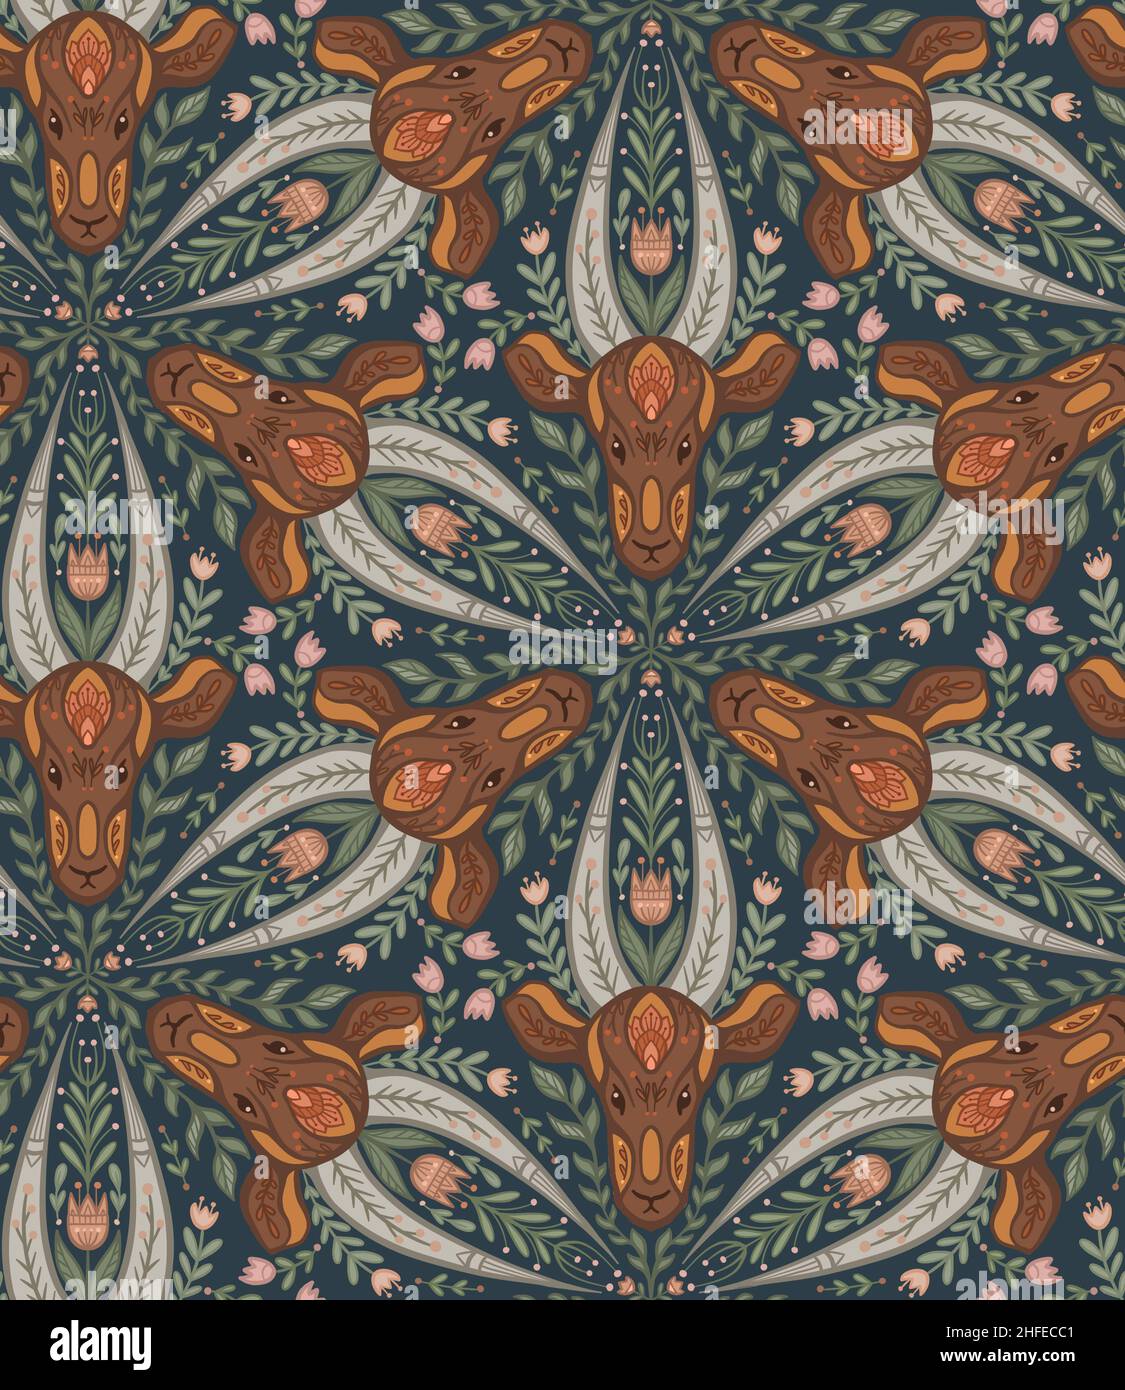 Seamless pattern with antelope heads with folk art. Gazelle with floral ornament. Kaleidoscope with animals with natural decorations on a dark backgro Stock Photo